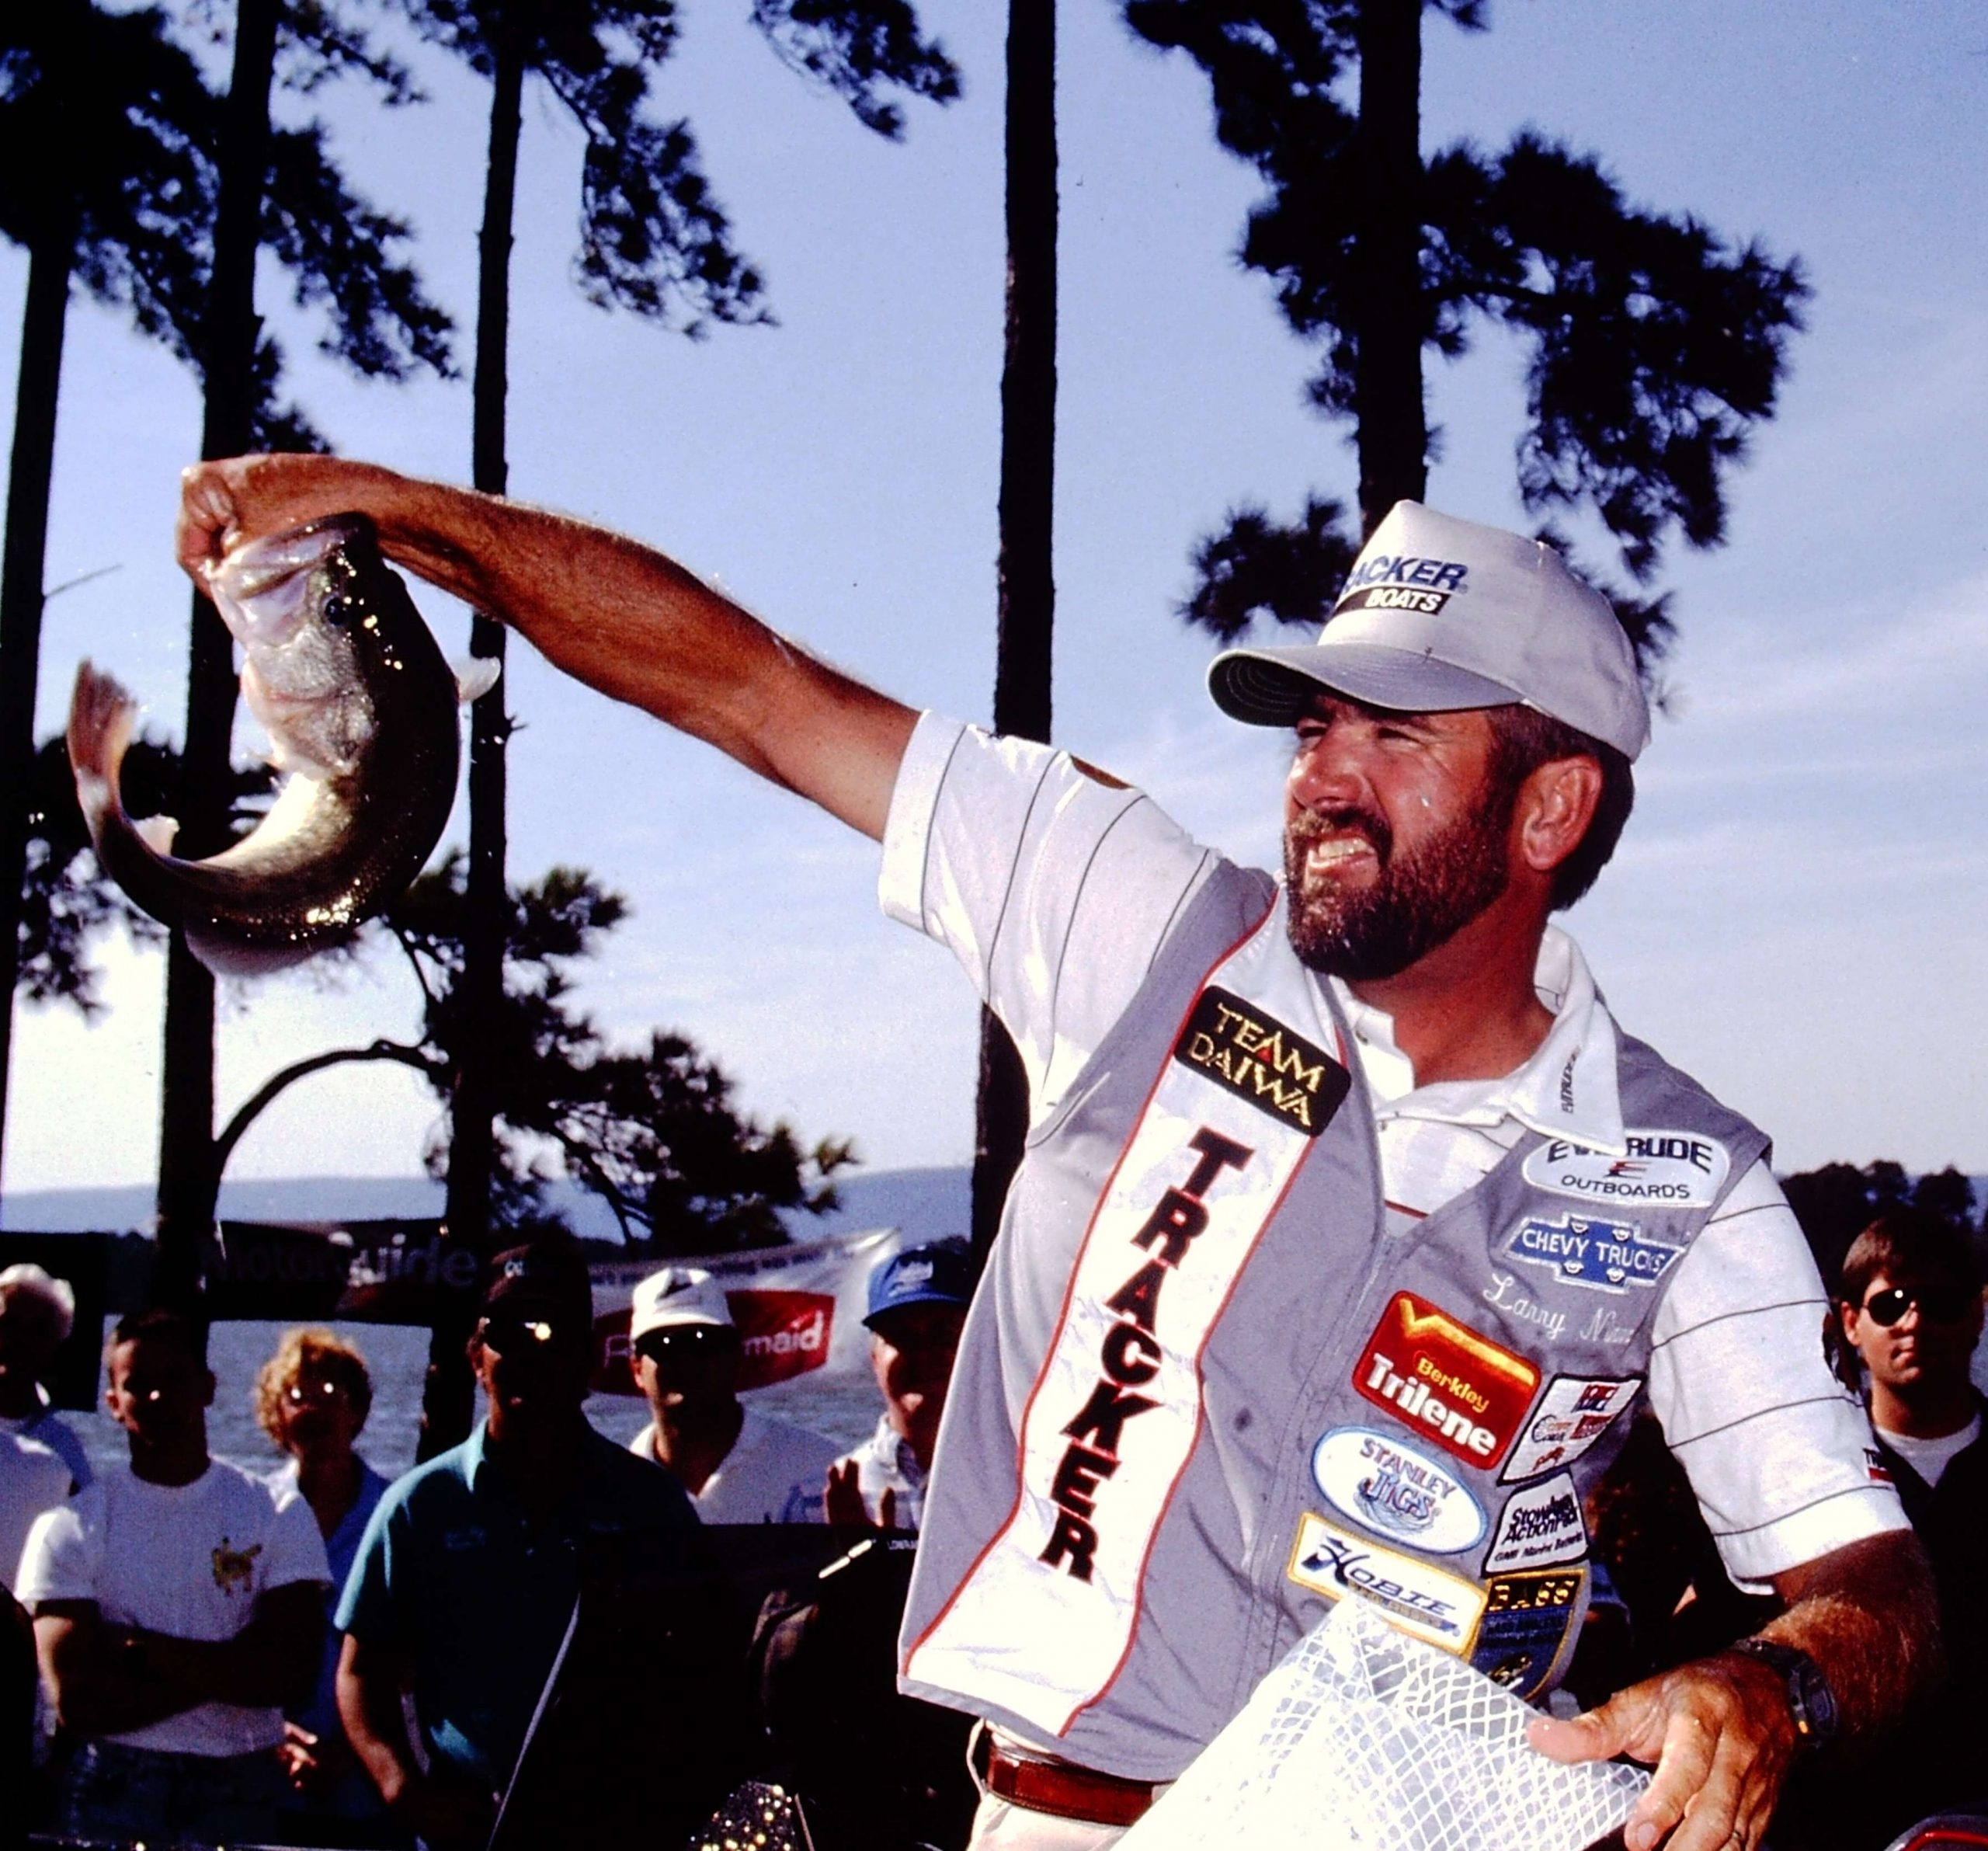 <p><u><strong>First to earn $1 million</strong></u></p>
<p>Everyone knows the names at the top of the B.A.S.S. winnings list. But for years, Larry Nixon held that honor. The veteran Arkansas angler was the first to reach the $1 million mark, and it happened Oct. 17, 1992. In all, Nixon competed in 260 tournaments and ended his B.A.S.S. career with $1.6 million.</p>
